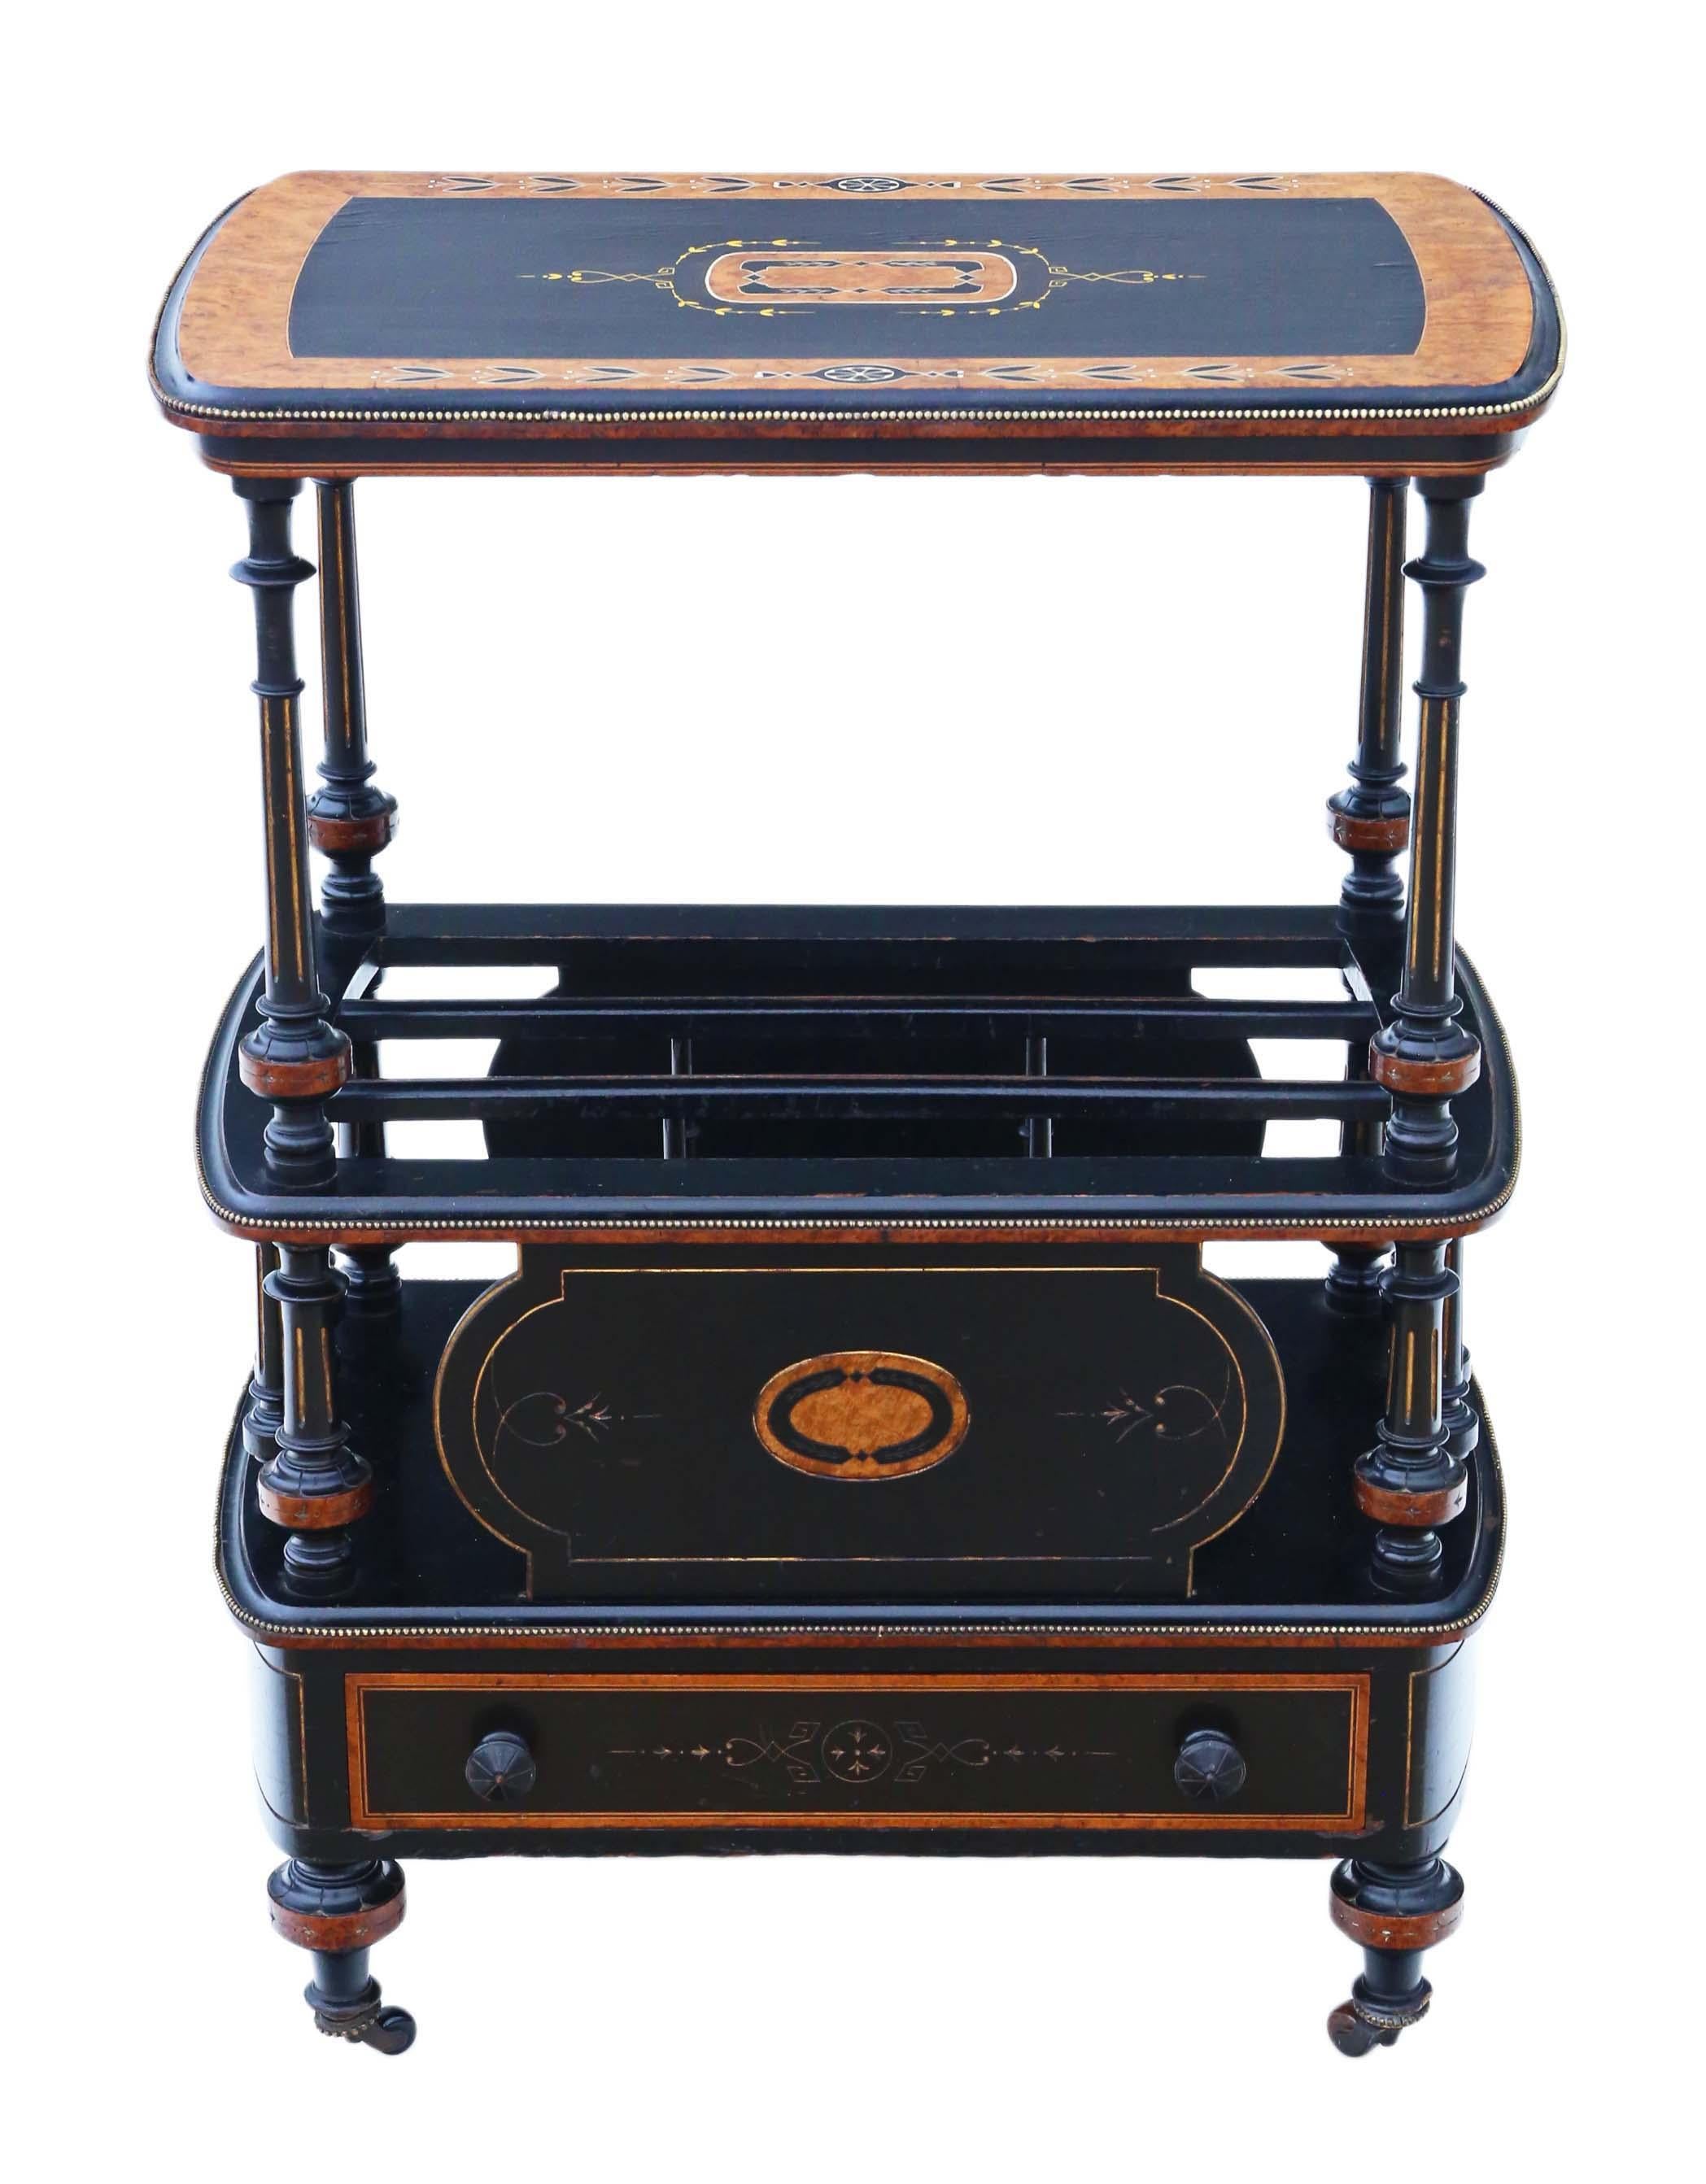 Antique Victorian Aesthetic Canterbury whatnot dating from around 1880, elegantly ebonized with inlaid amboyna and brass edging, presenting a delightful mix of charm and character.

This is a rare and attractive quality piece, featuring a decorative